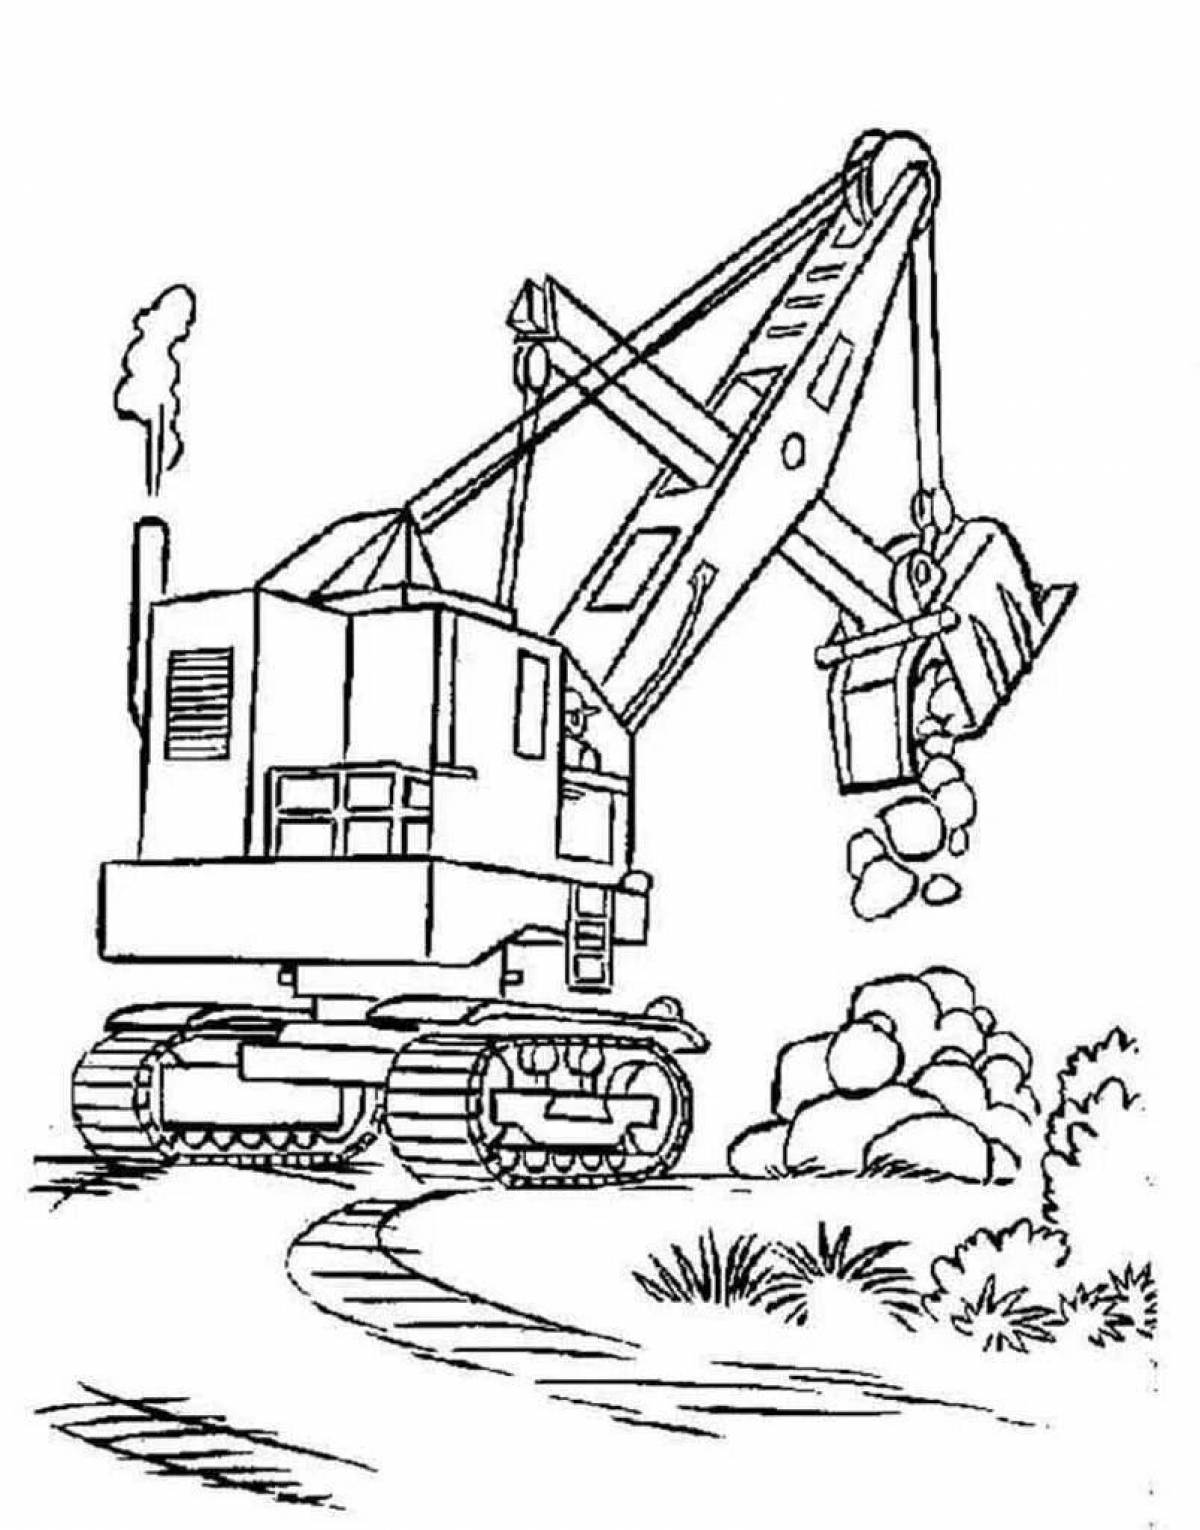 Inviting excavator coloring book for children 5-6 years old